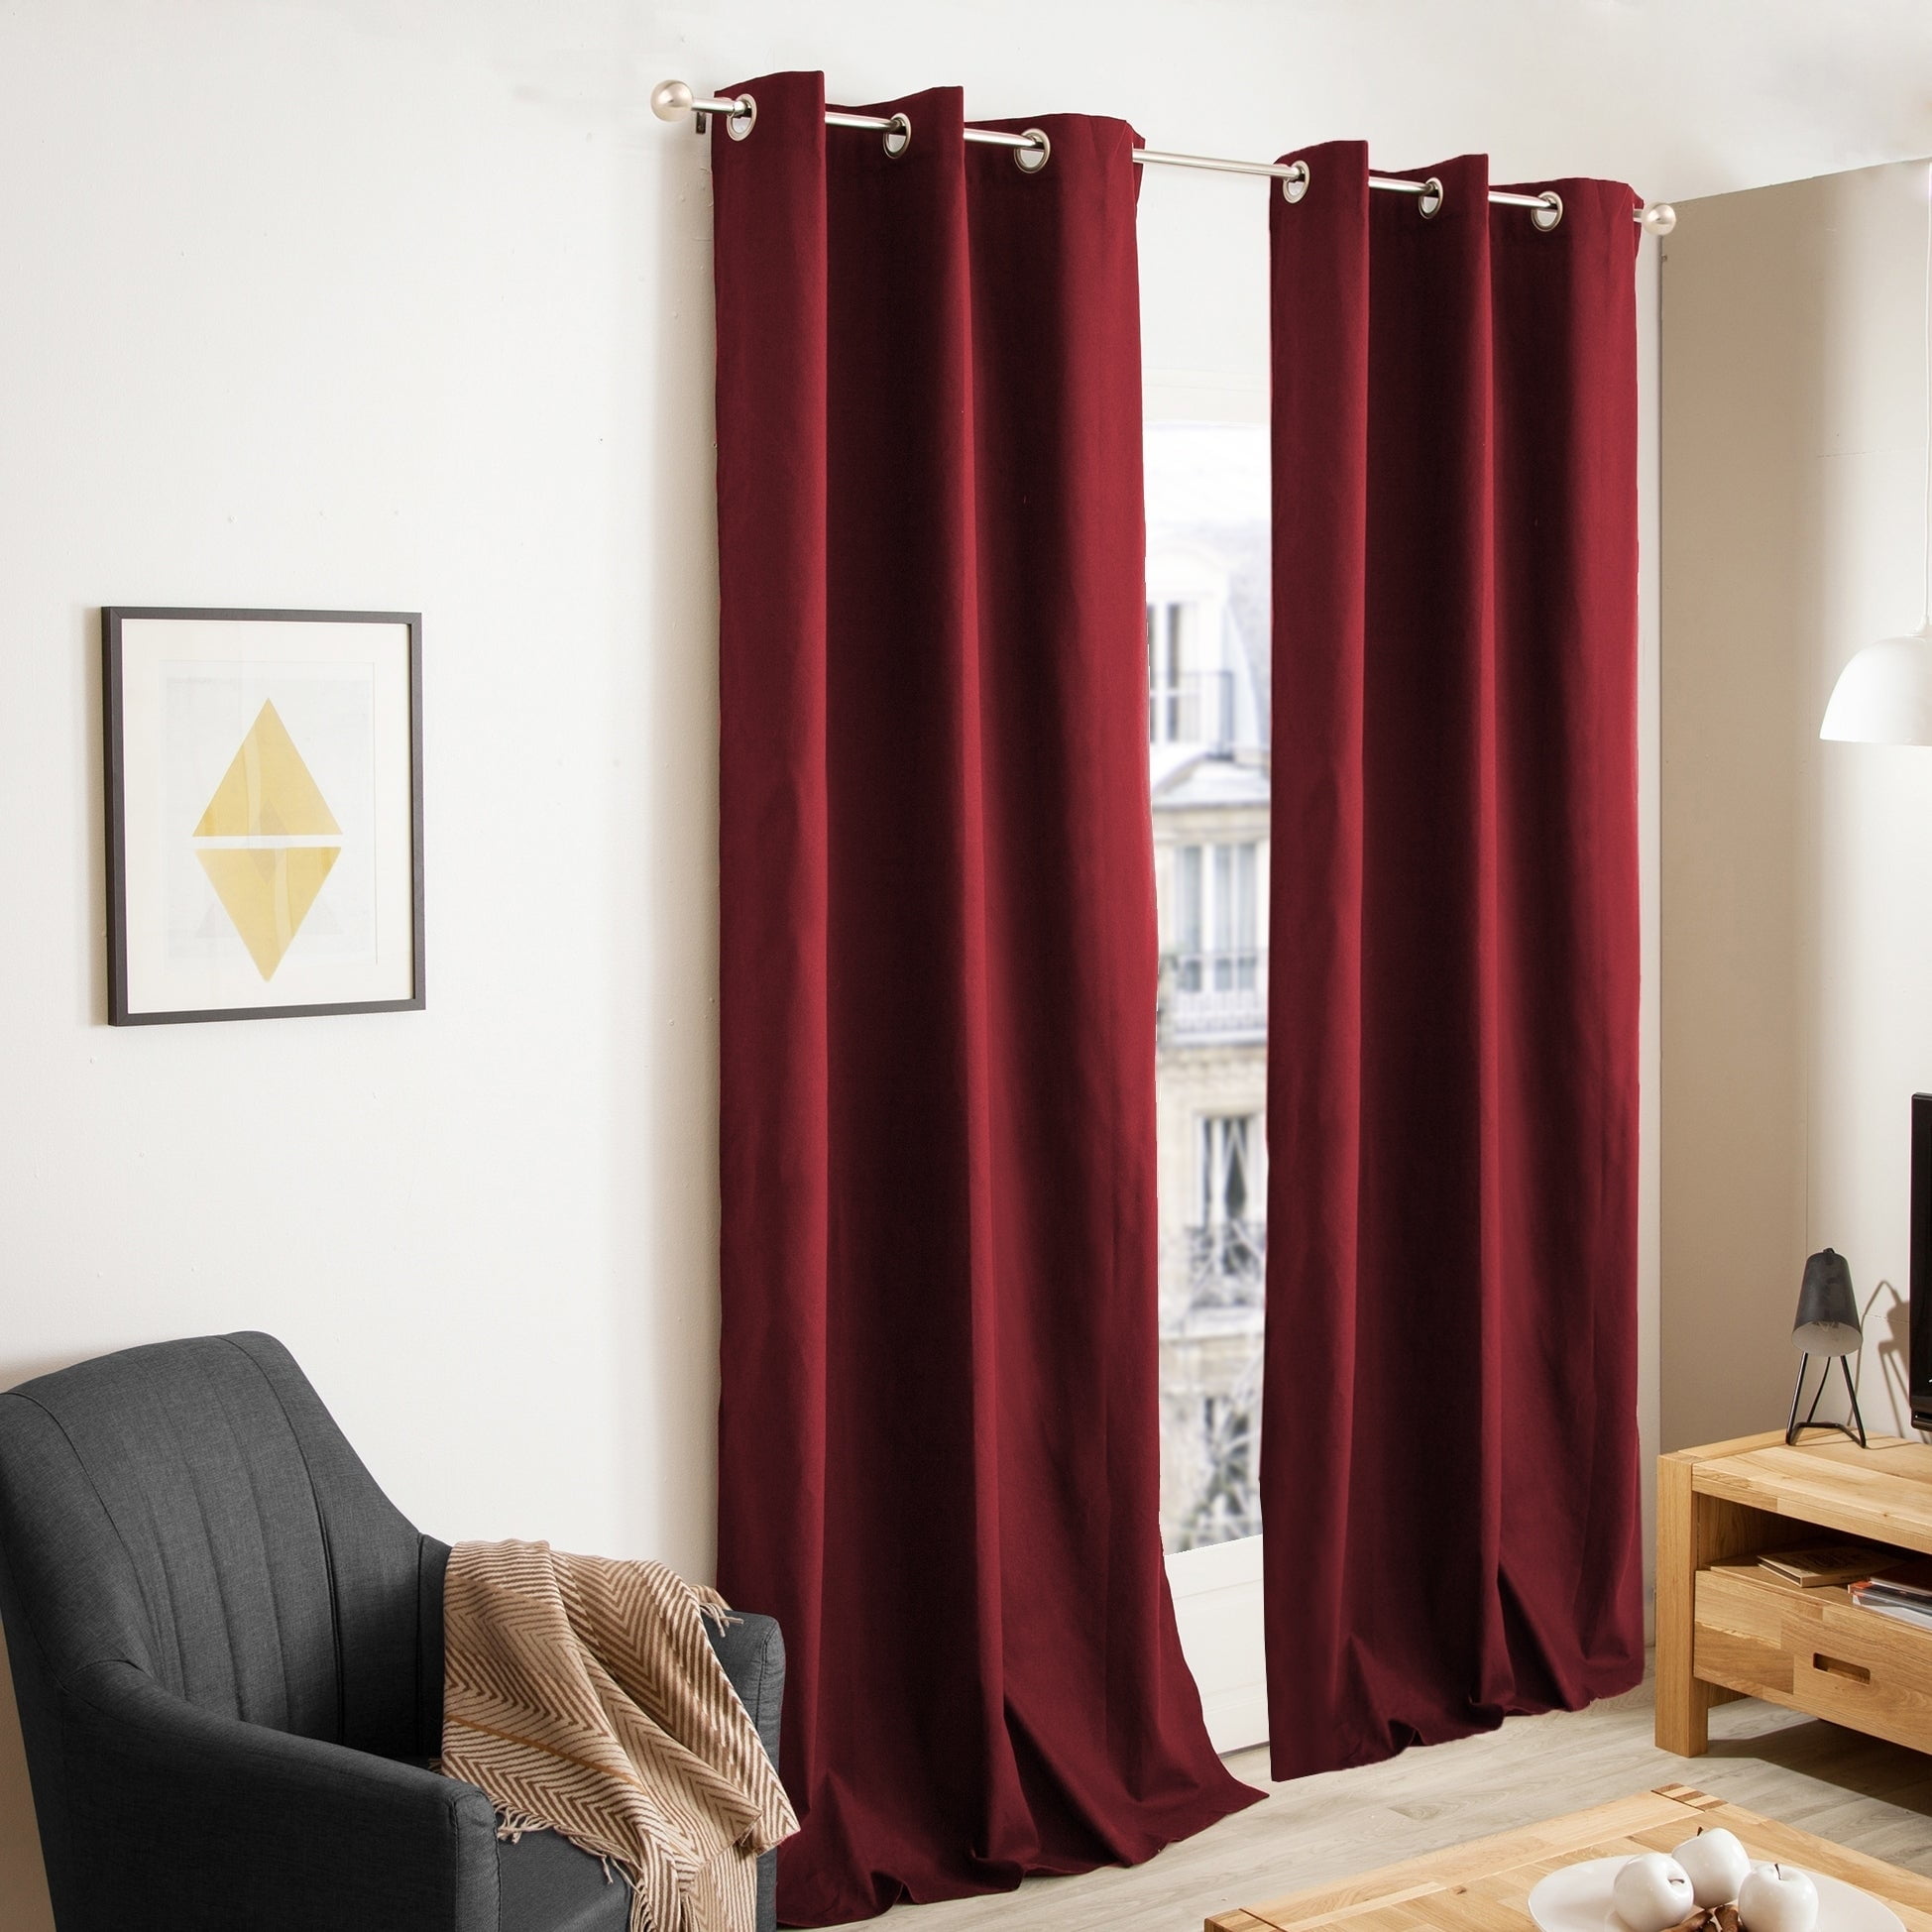 Thermal Blackout  Belgravia Tape Top Curtains,Door Curtains Ties,Cushion Cover 